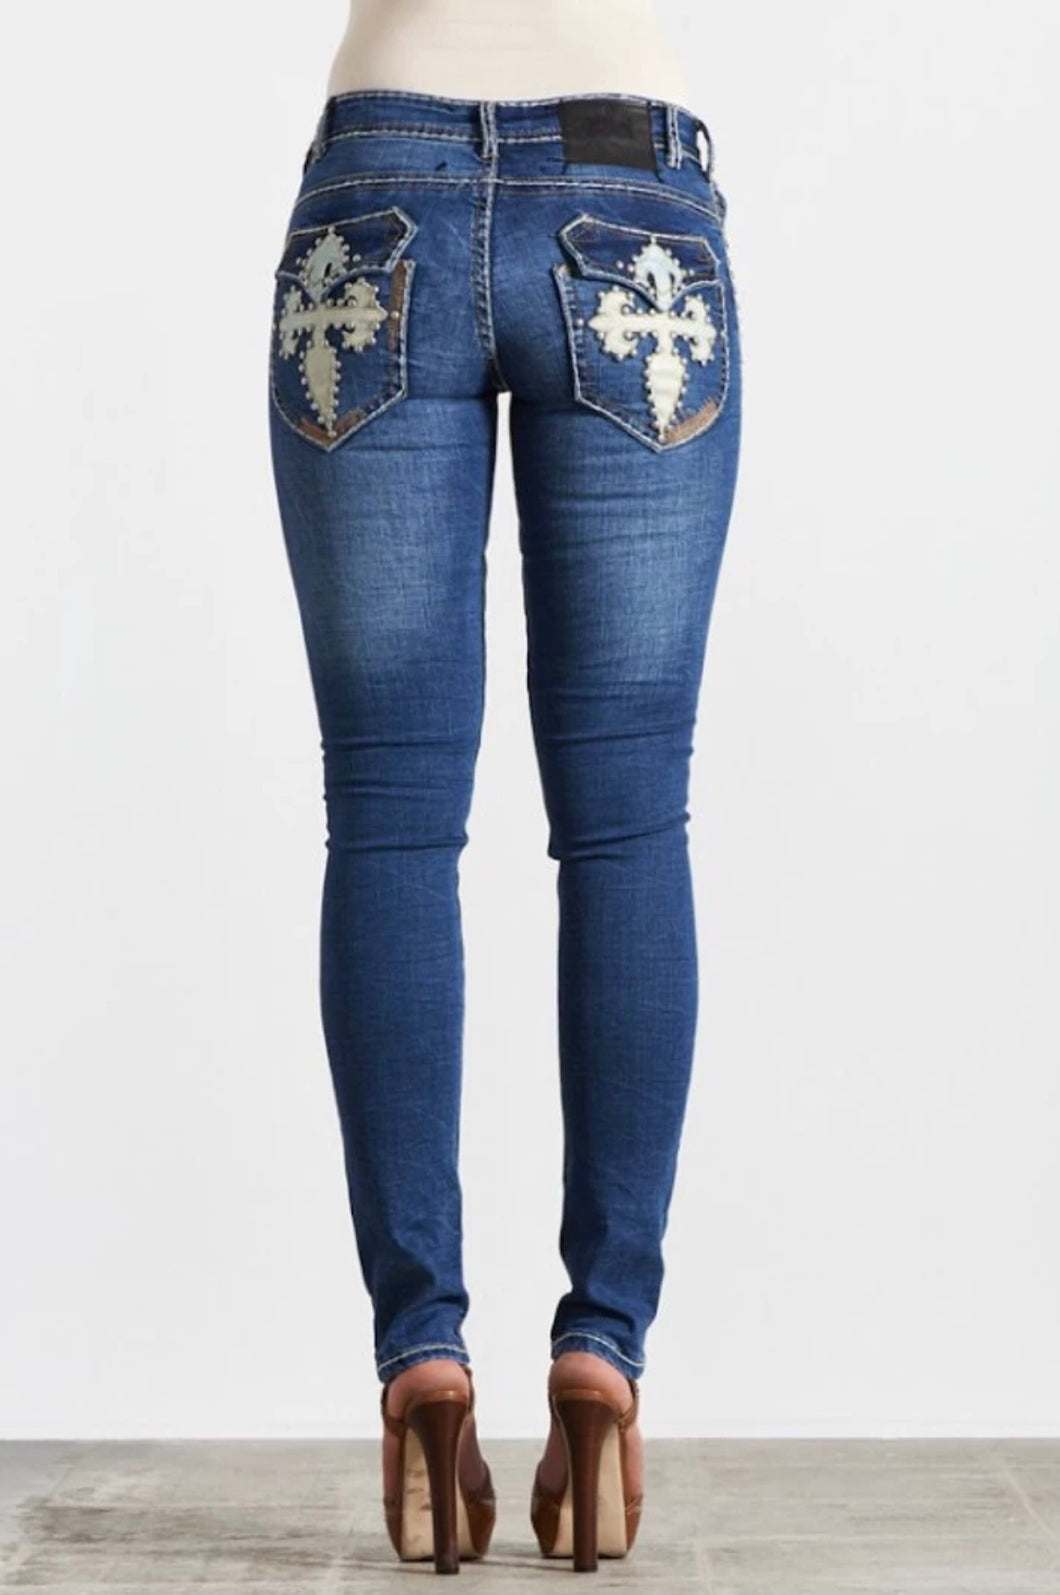 Nottingham Jeans from New London